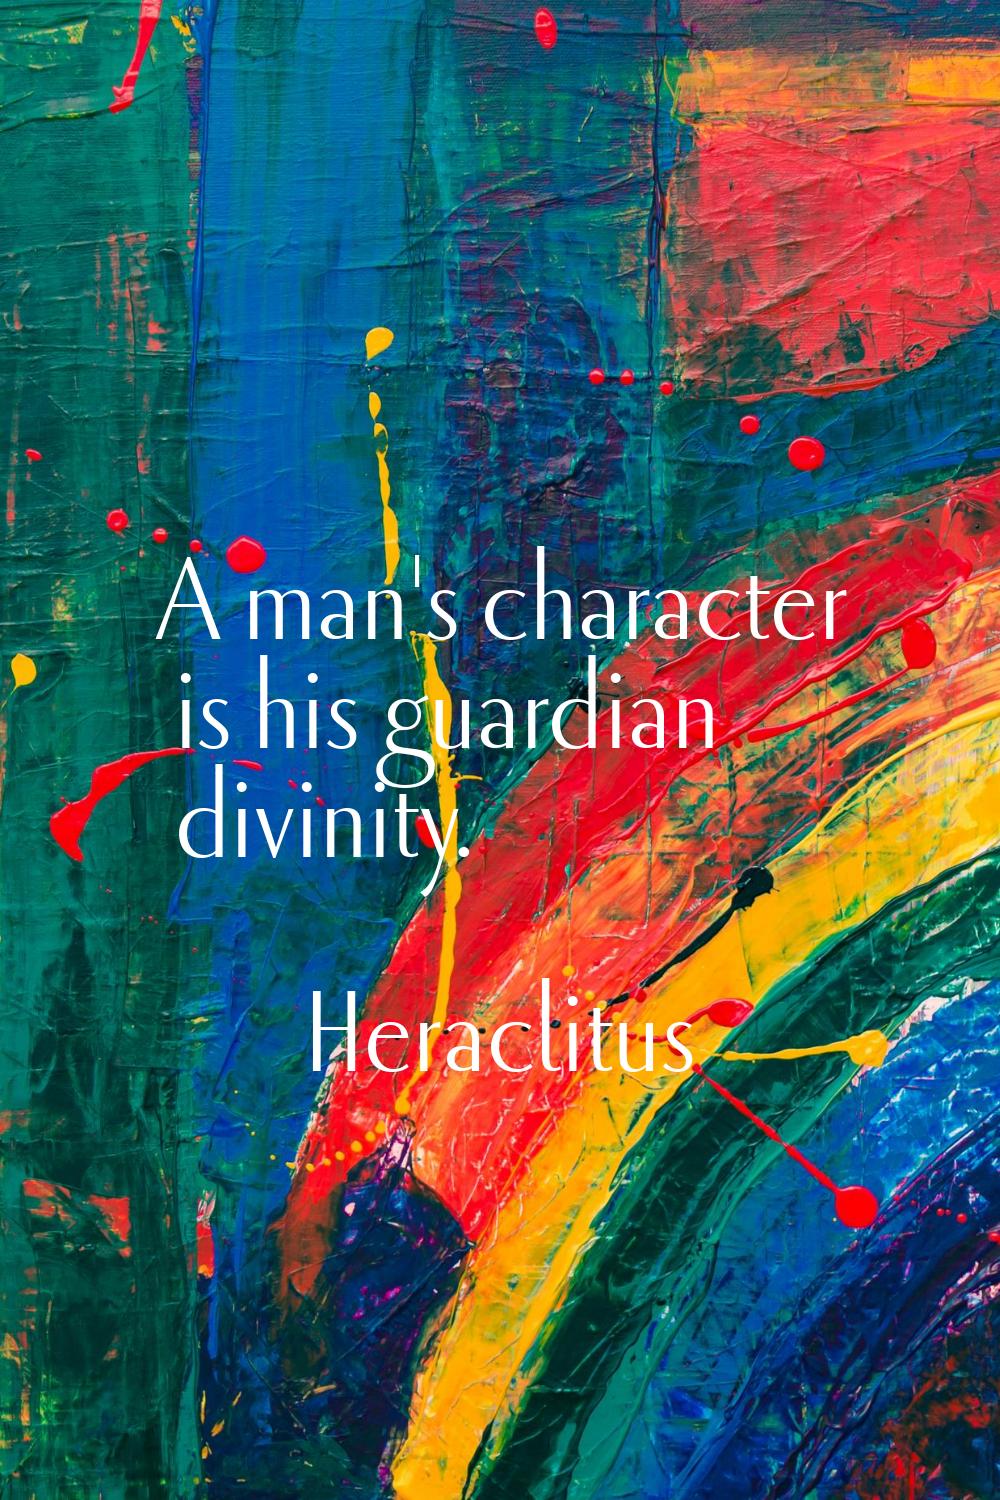 A man's character is his guardian divinity.